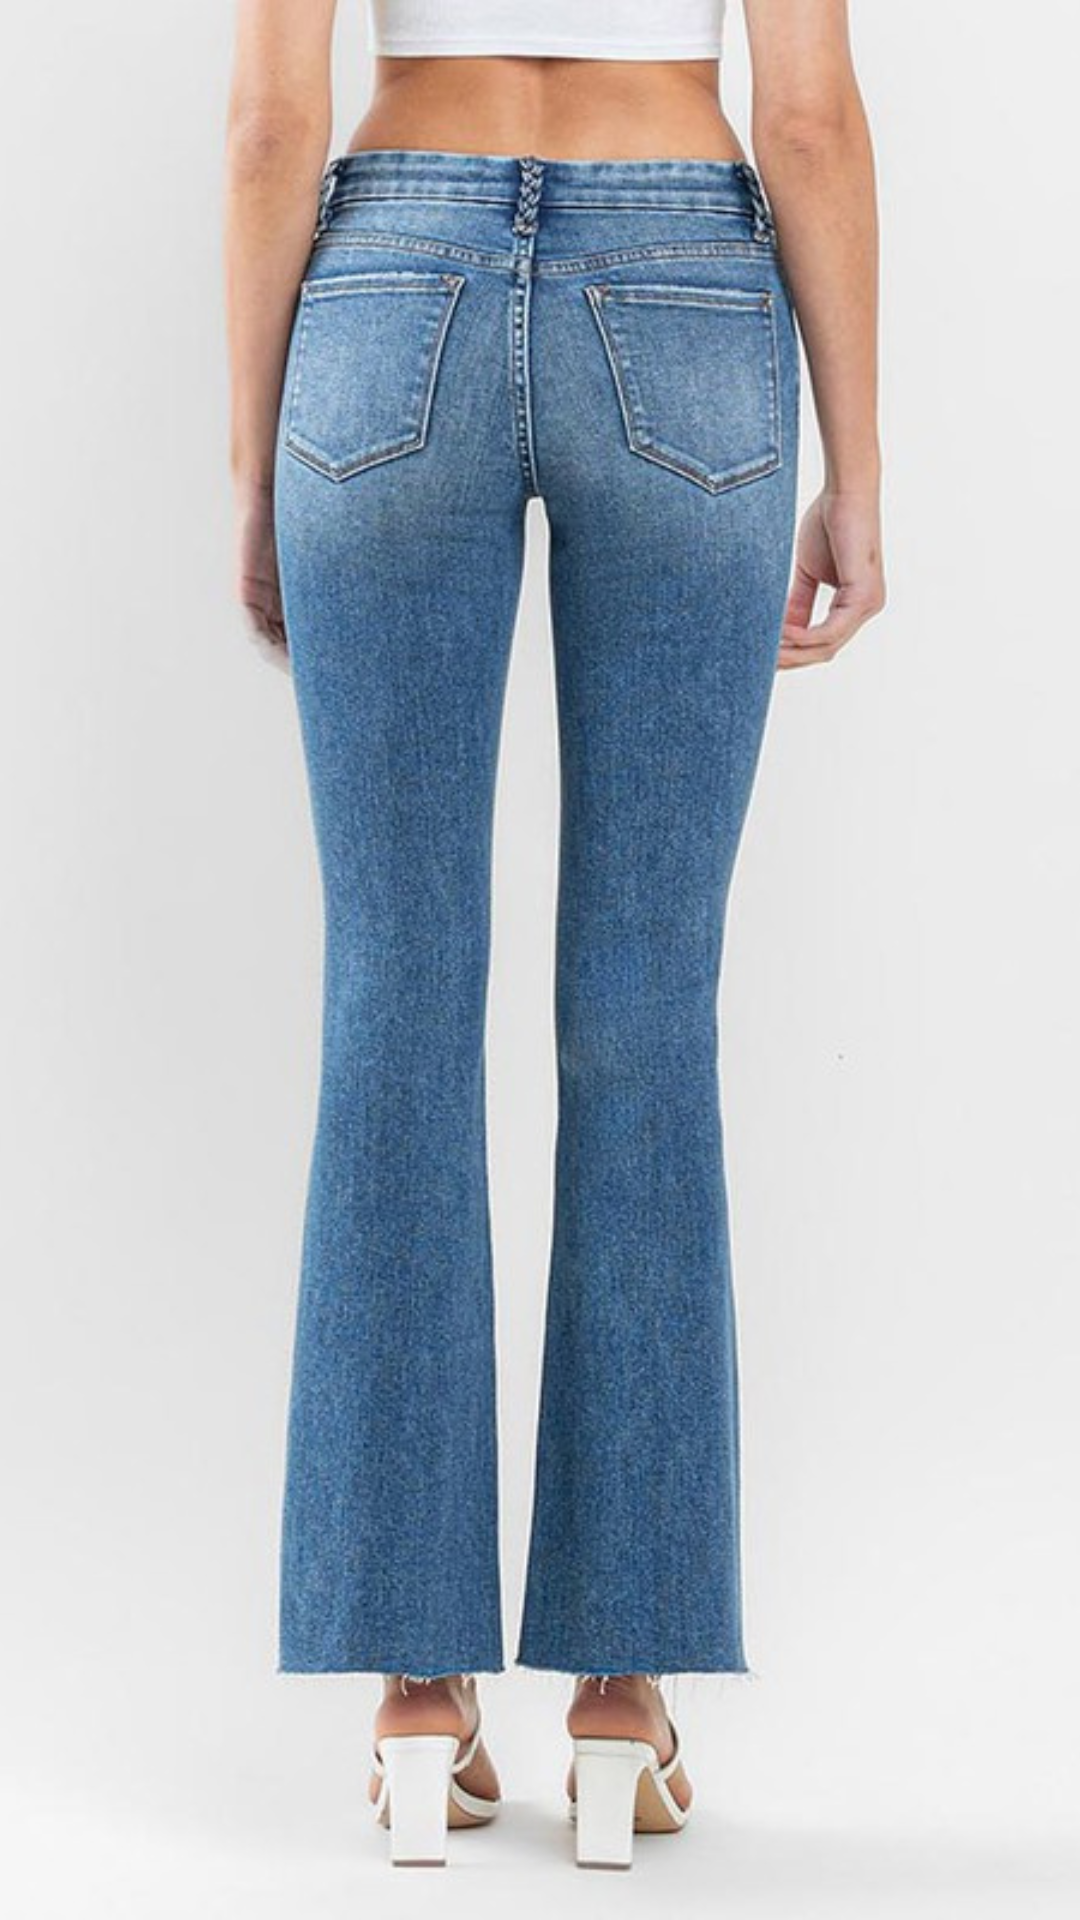 Low Rise Flare Jeans With Braided Belt Loops